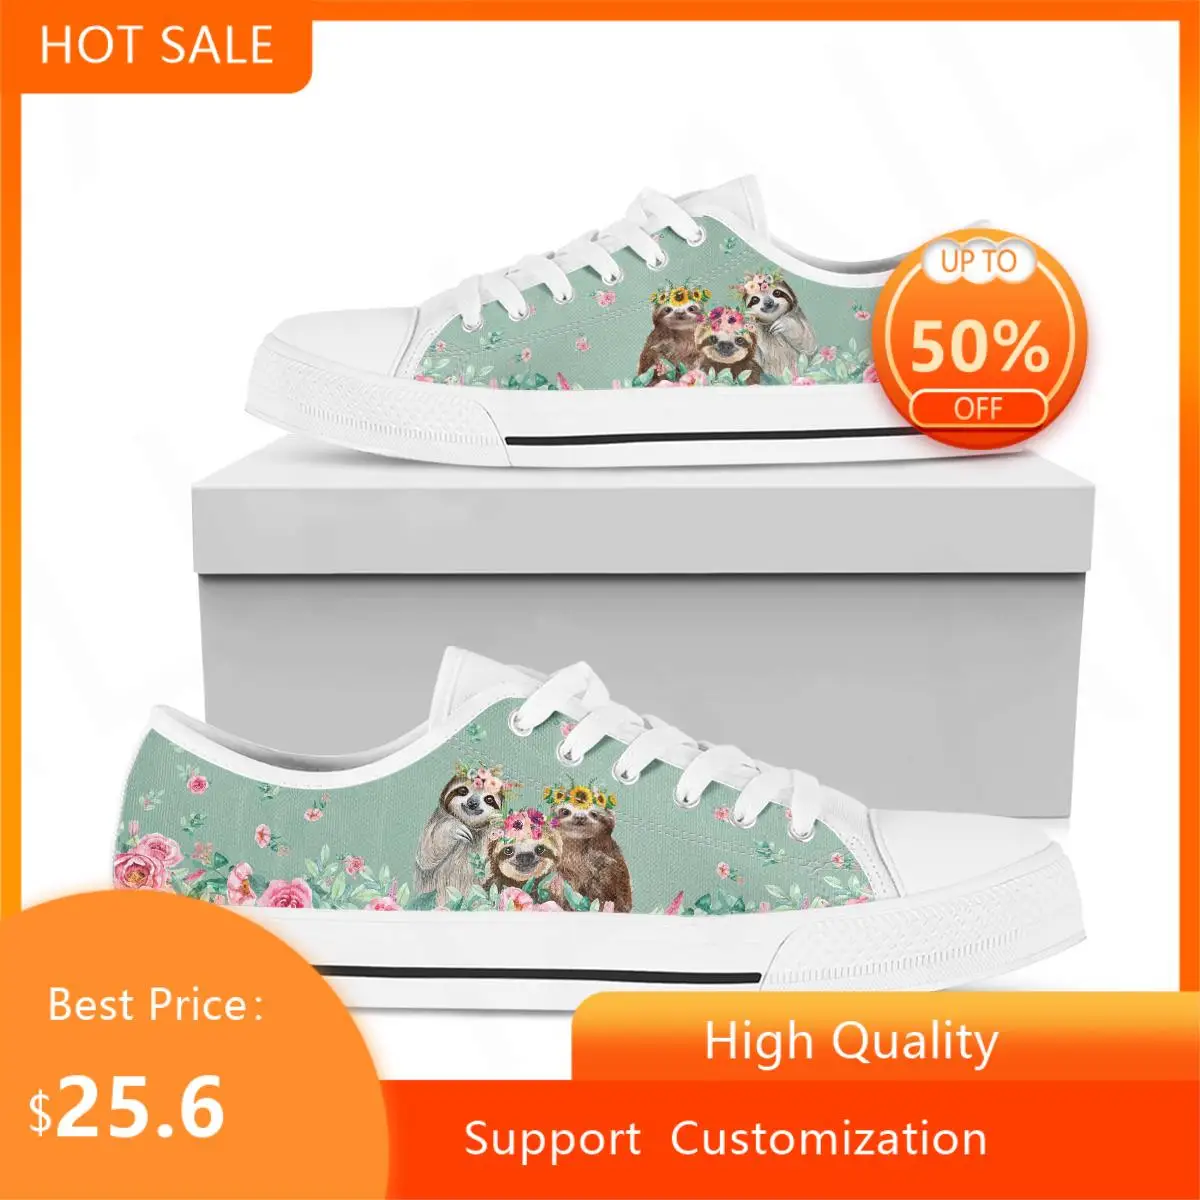 

BKQU Women Canvas Shoes Pink Sloth Floral Fashion Autumn Summer Sneakers Casual Sneakers Low Top Female Students Flats 2022